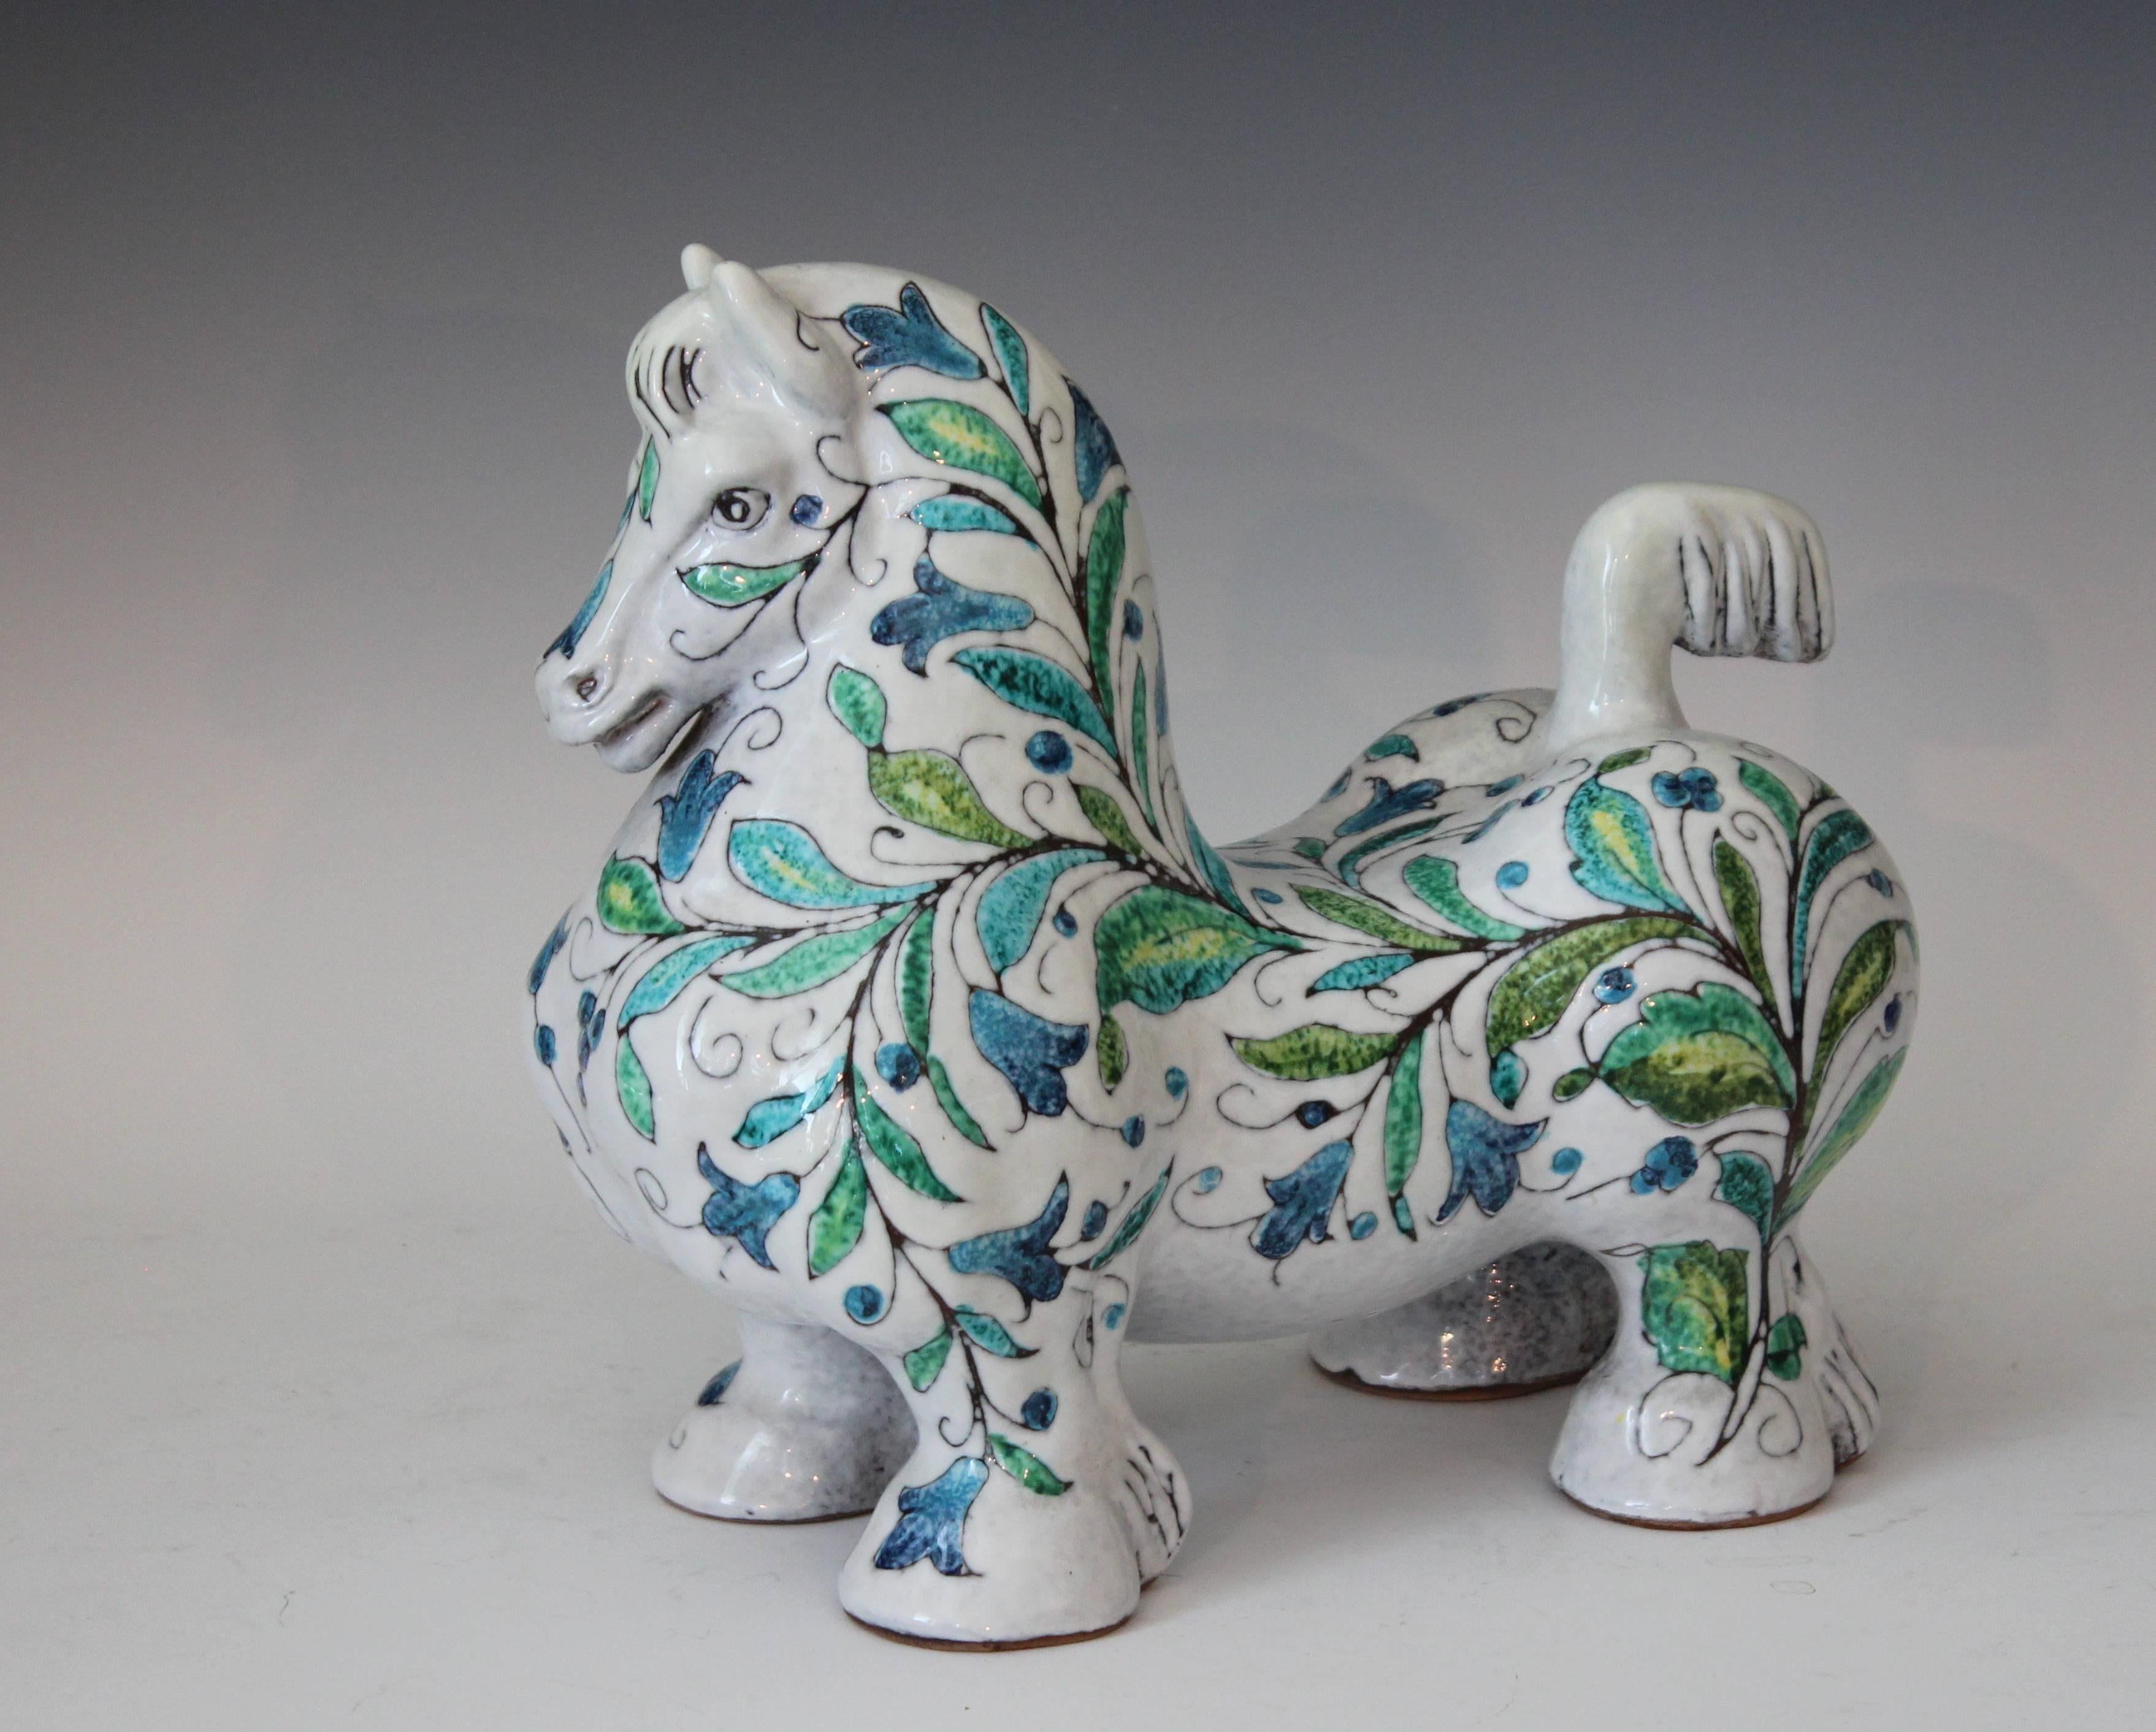 Large vintage Italian pottery stylized horse, circa 1960's. Well fed and painted in thick glaze with blue and green floral decor on a mottled white ground. From the Mancioli Pottery of the Florence region.  Measures: 11 1/4